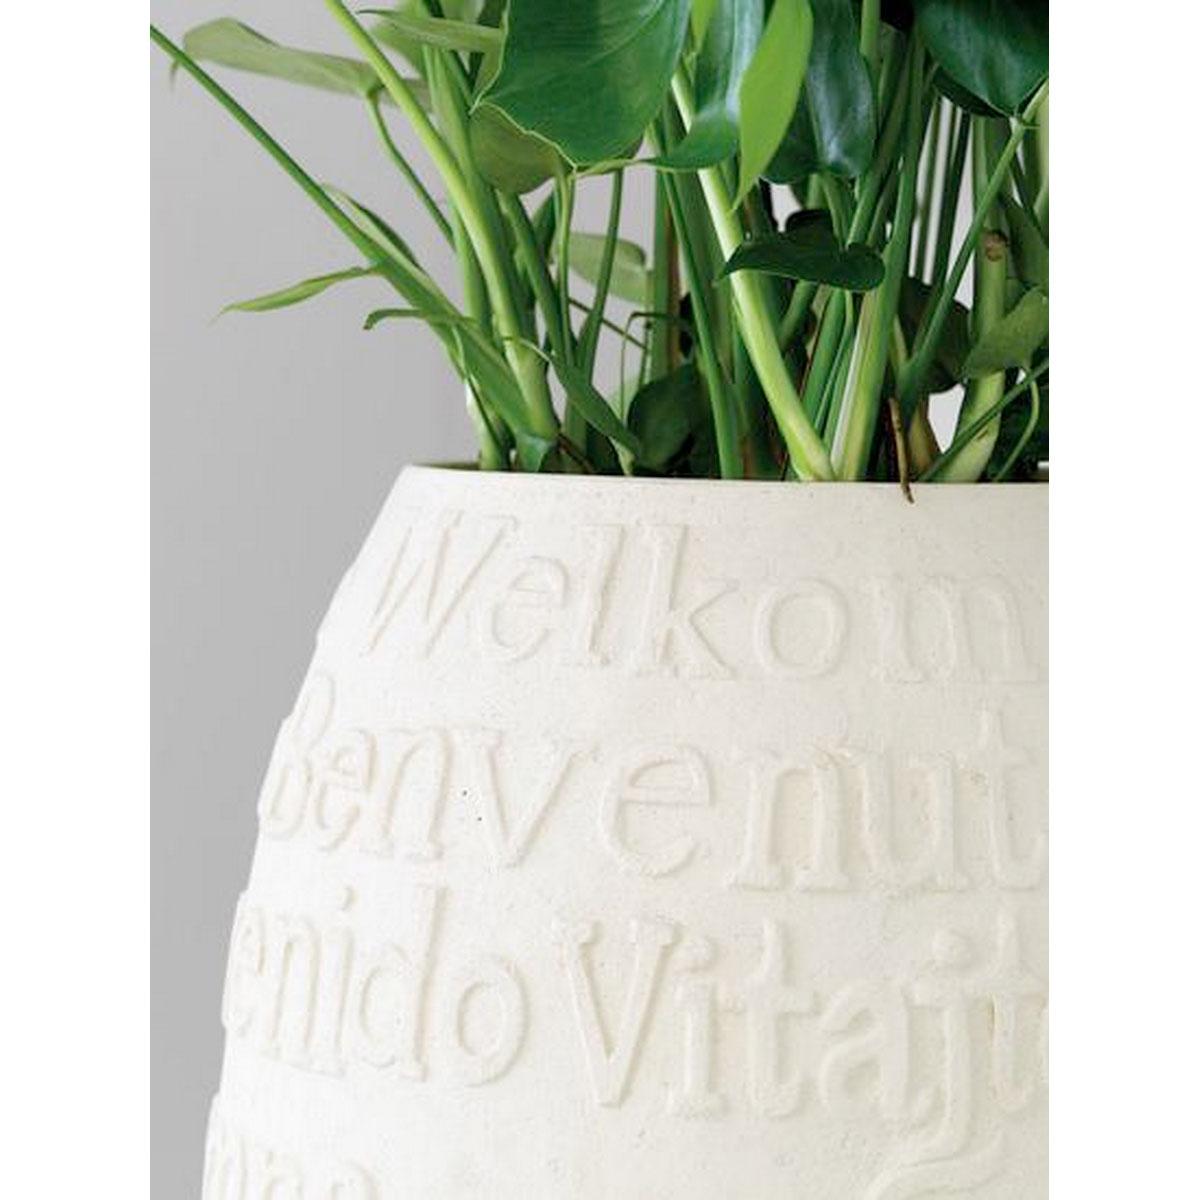 Welcome Round Tall Polystone Outdoor Planter